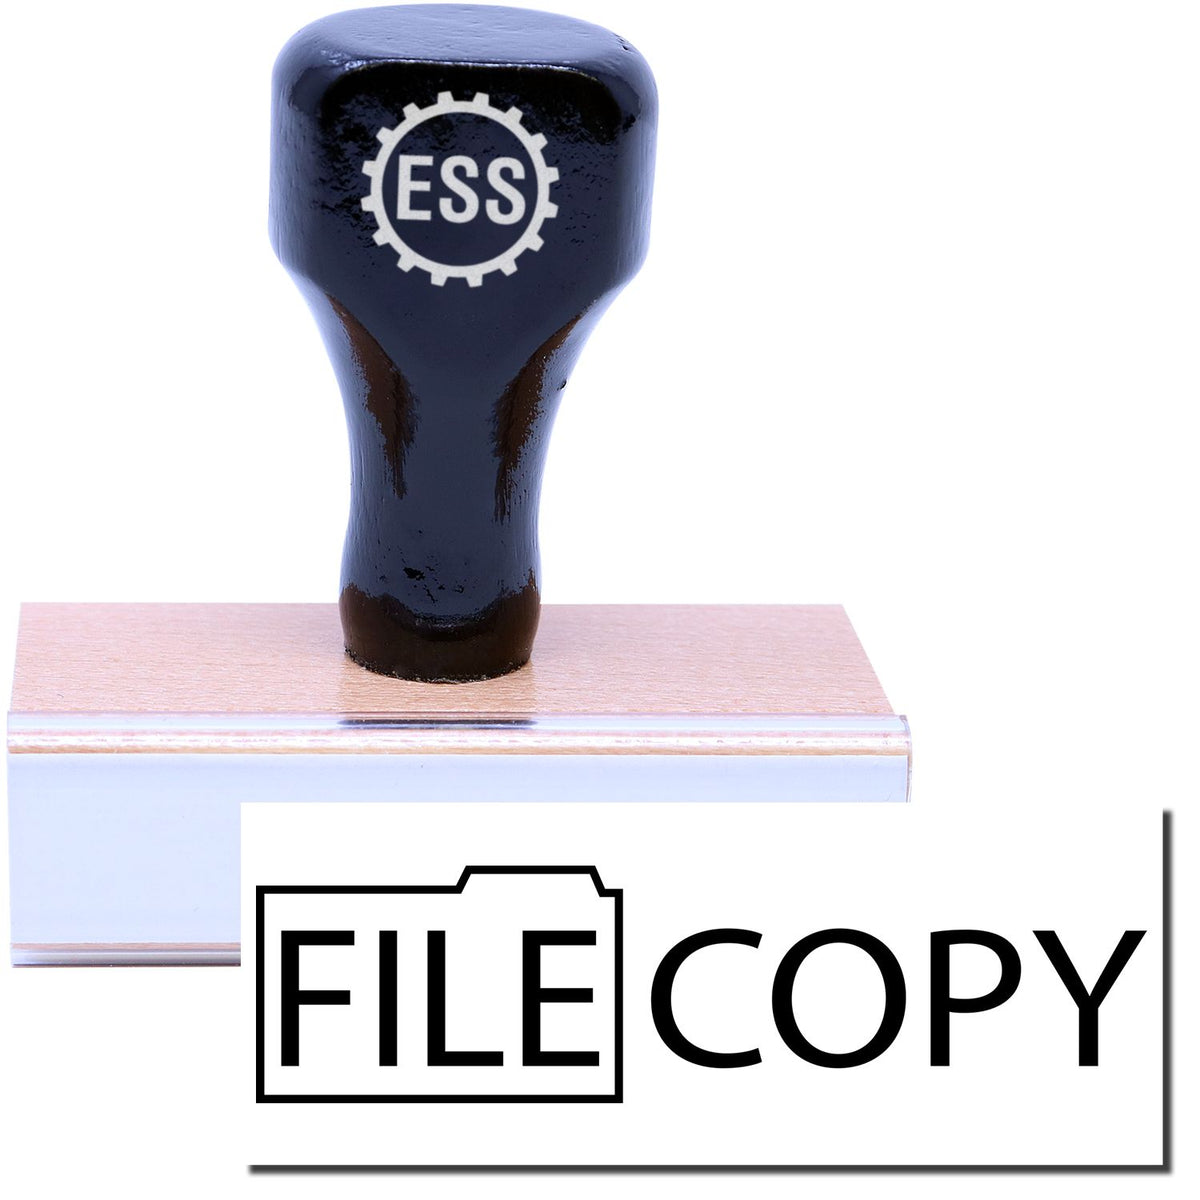 A stock office rubber stamp with a stamped image showing how the text &quot;FILE COPY&quot; in a large font with a graphic of a folder is displayed after stamping.